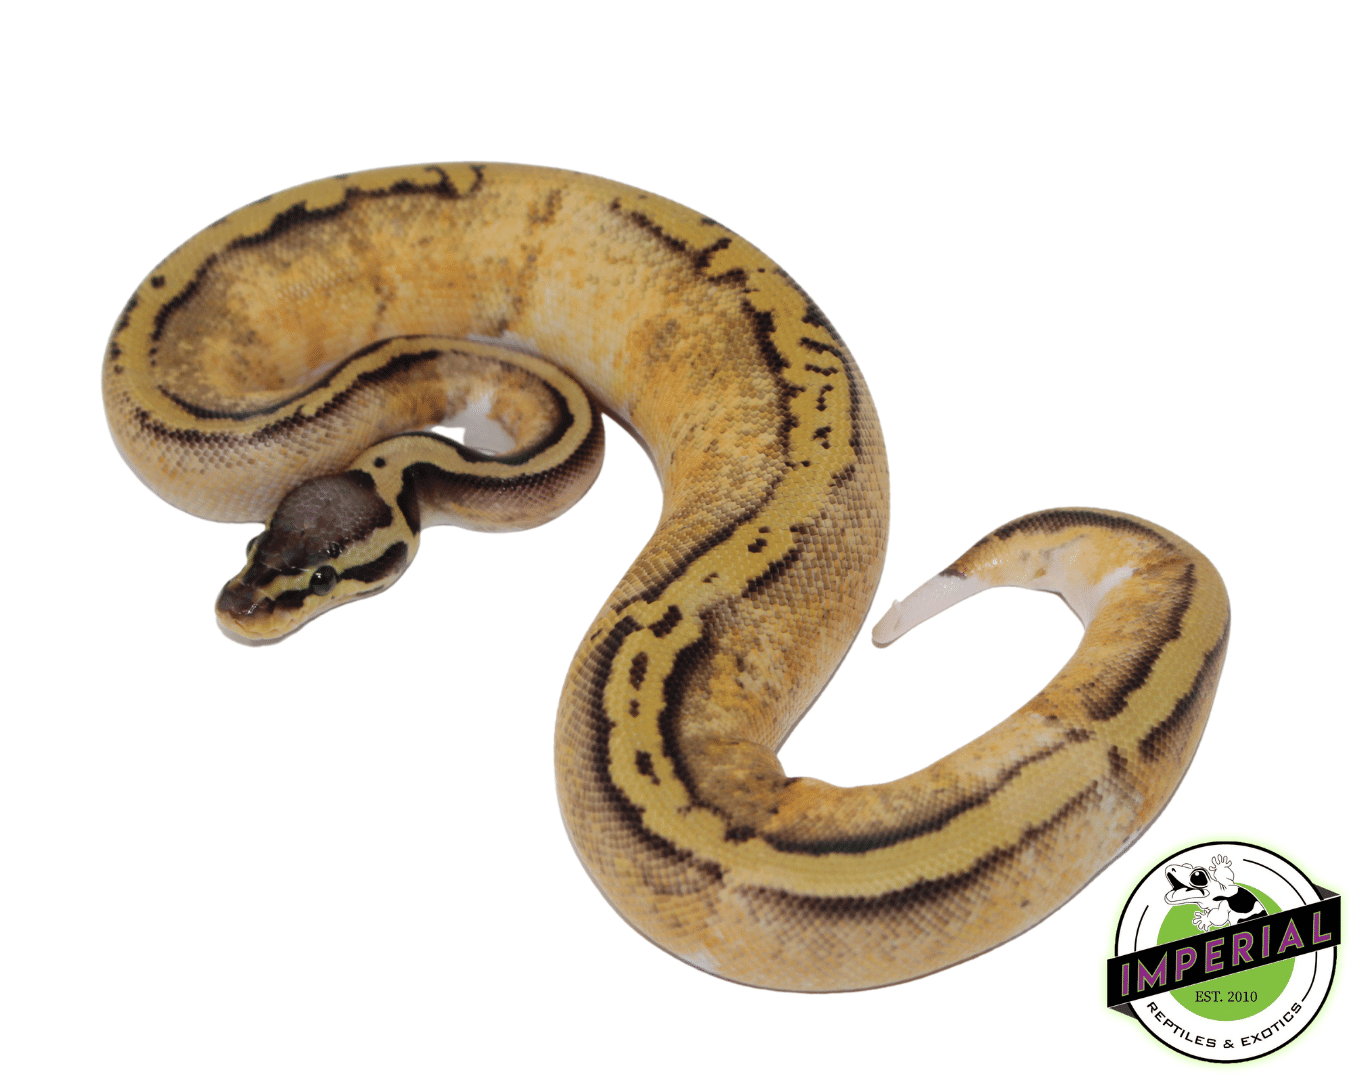 pastel yellowbelly pied ball python for sale, buy reptiles online